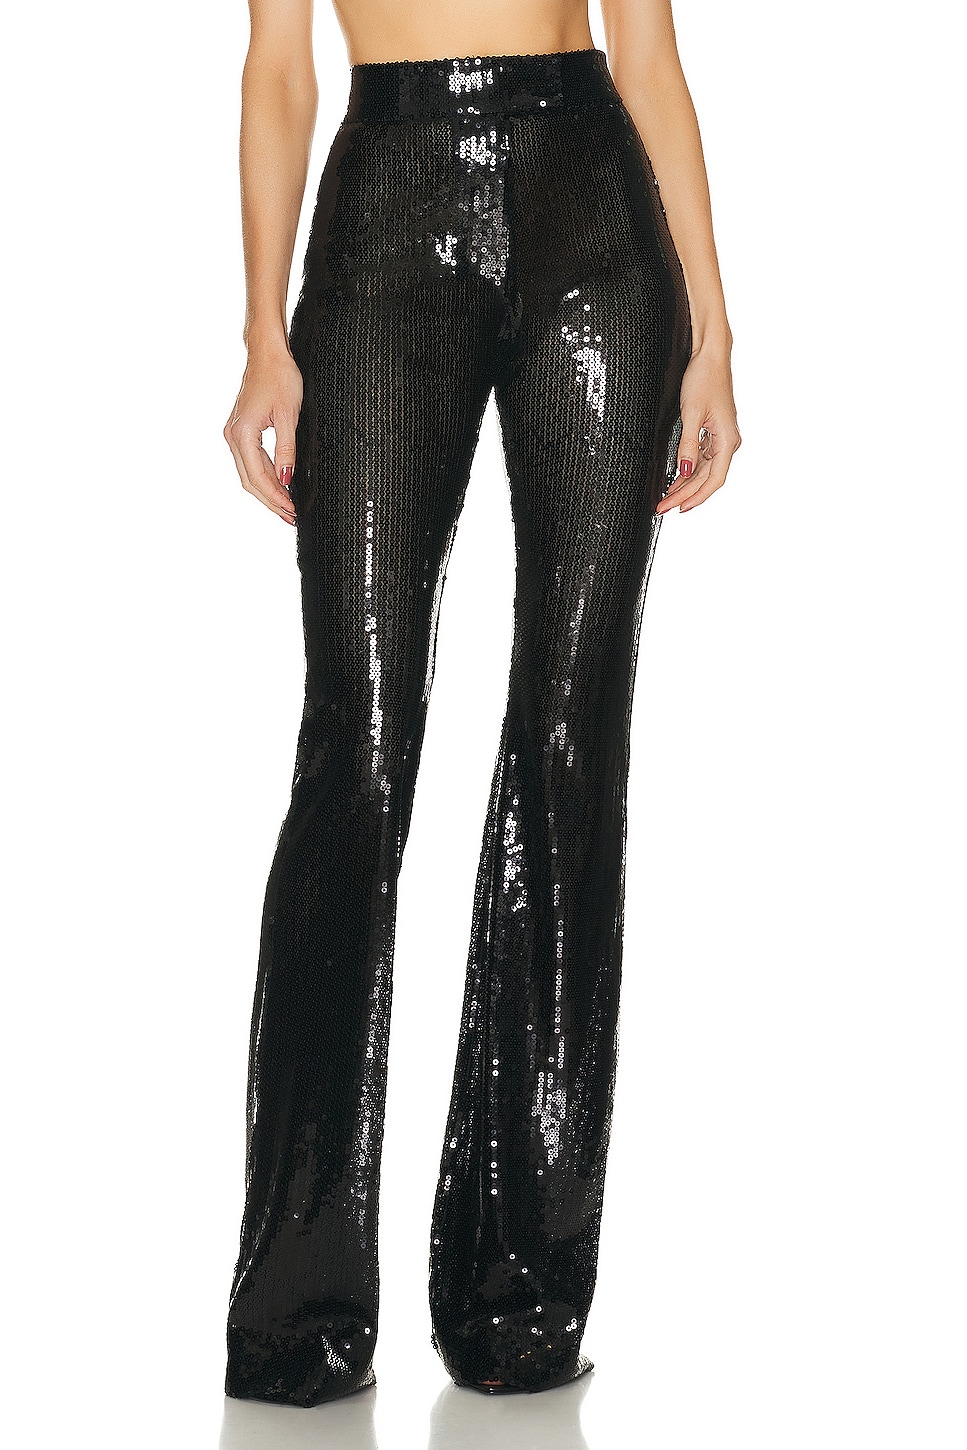 Image 1 of Alex Perry Sequin Flare Trouser in Black